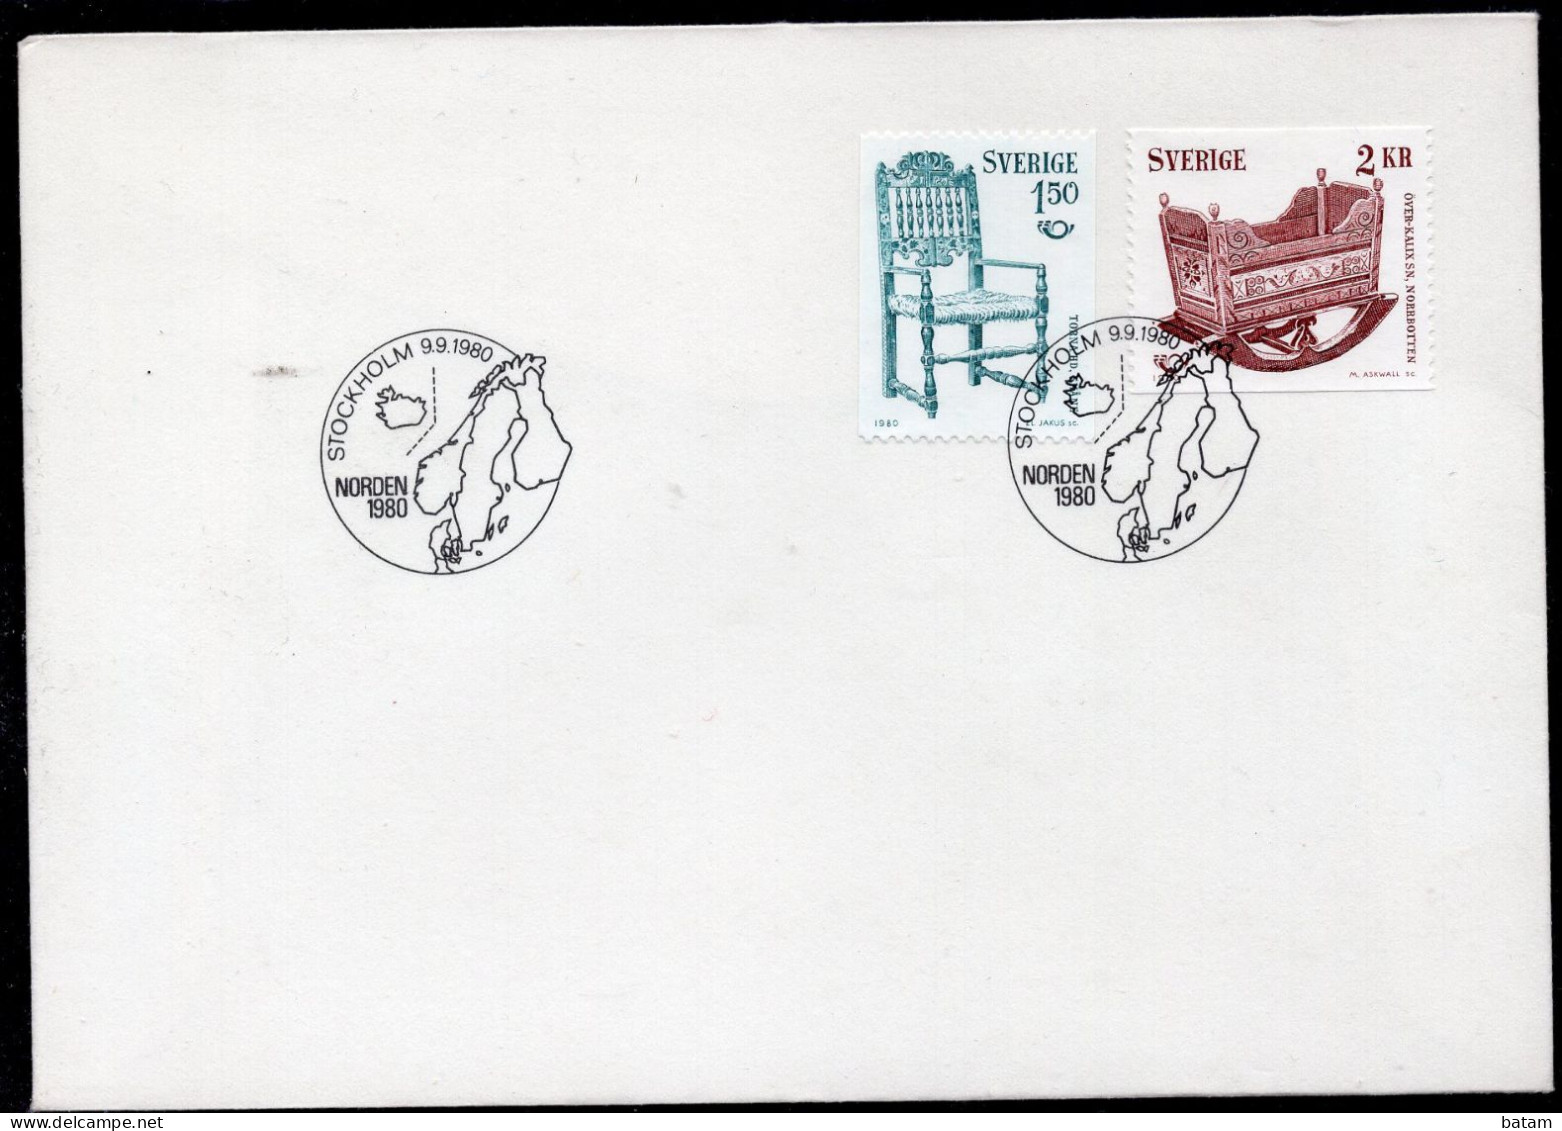 Sweden 1980 - The Nordic Countries - FDC - Covers & Documents